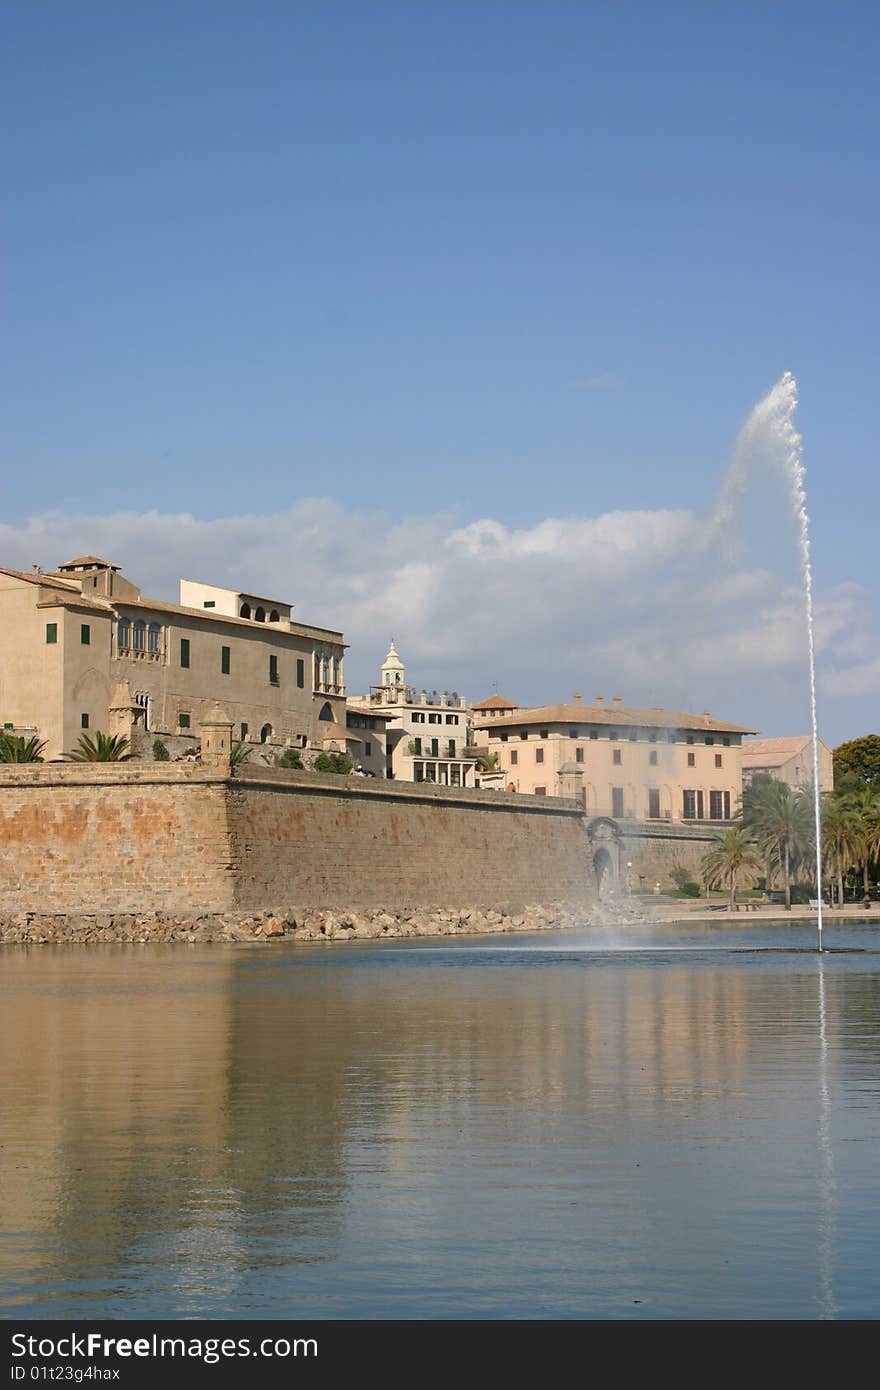 View of the Cathedral grounds, from across the lake, Palma de Mallorca, Spain. View of the Cathedral grounds, from across the lake, Palma de Mallorca, Spain